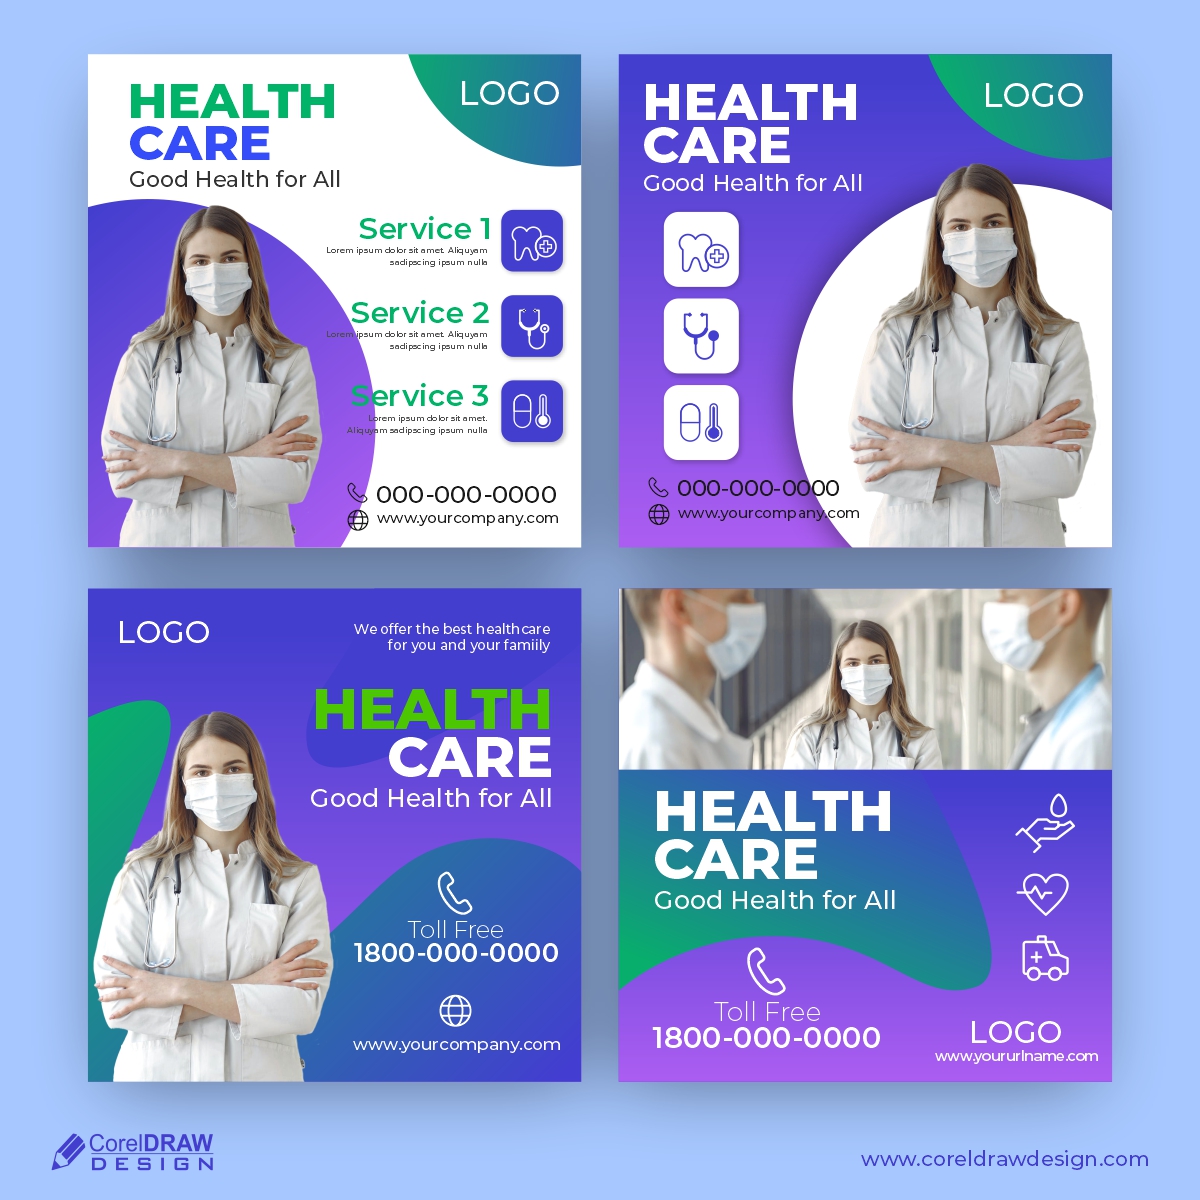 Download Health Care, Medical Services Social Media banner Template